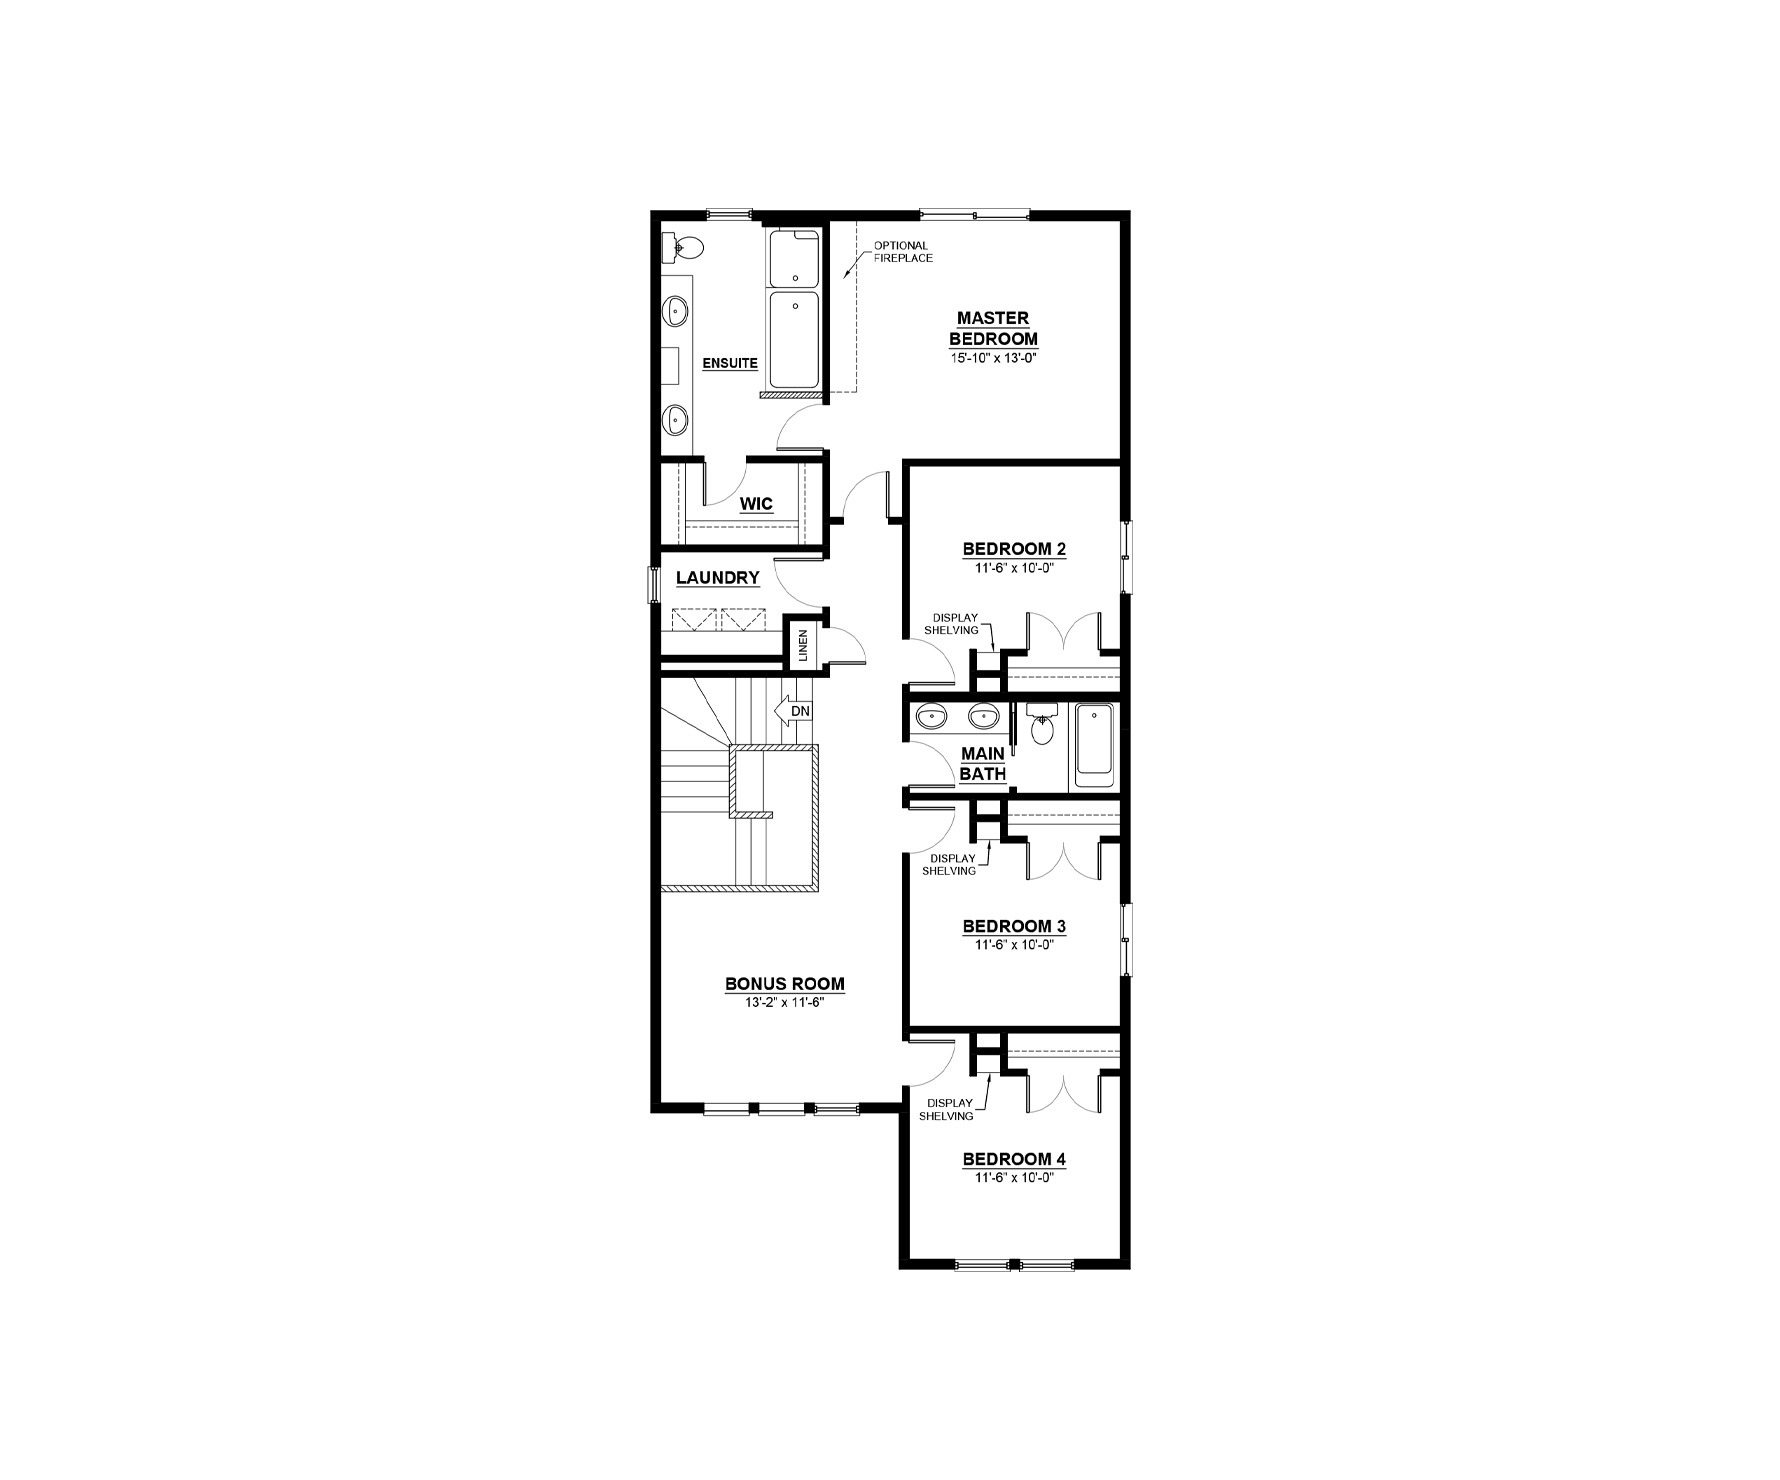 ESCALADE II Floor Plan of Saxony Glen by Daytona Homes with undefined beds